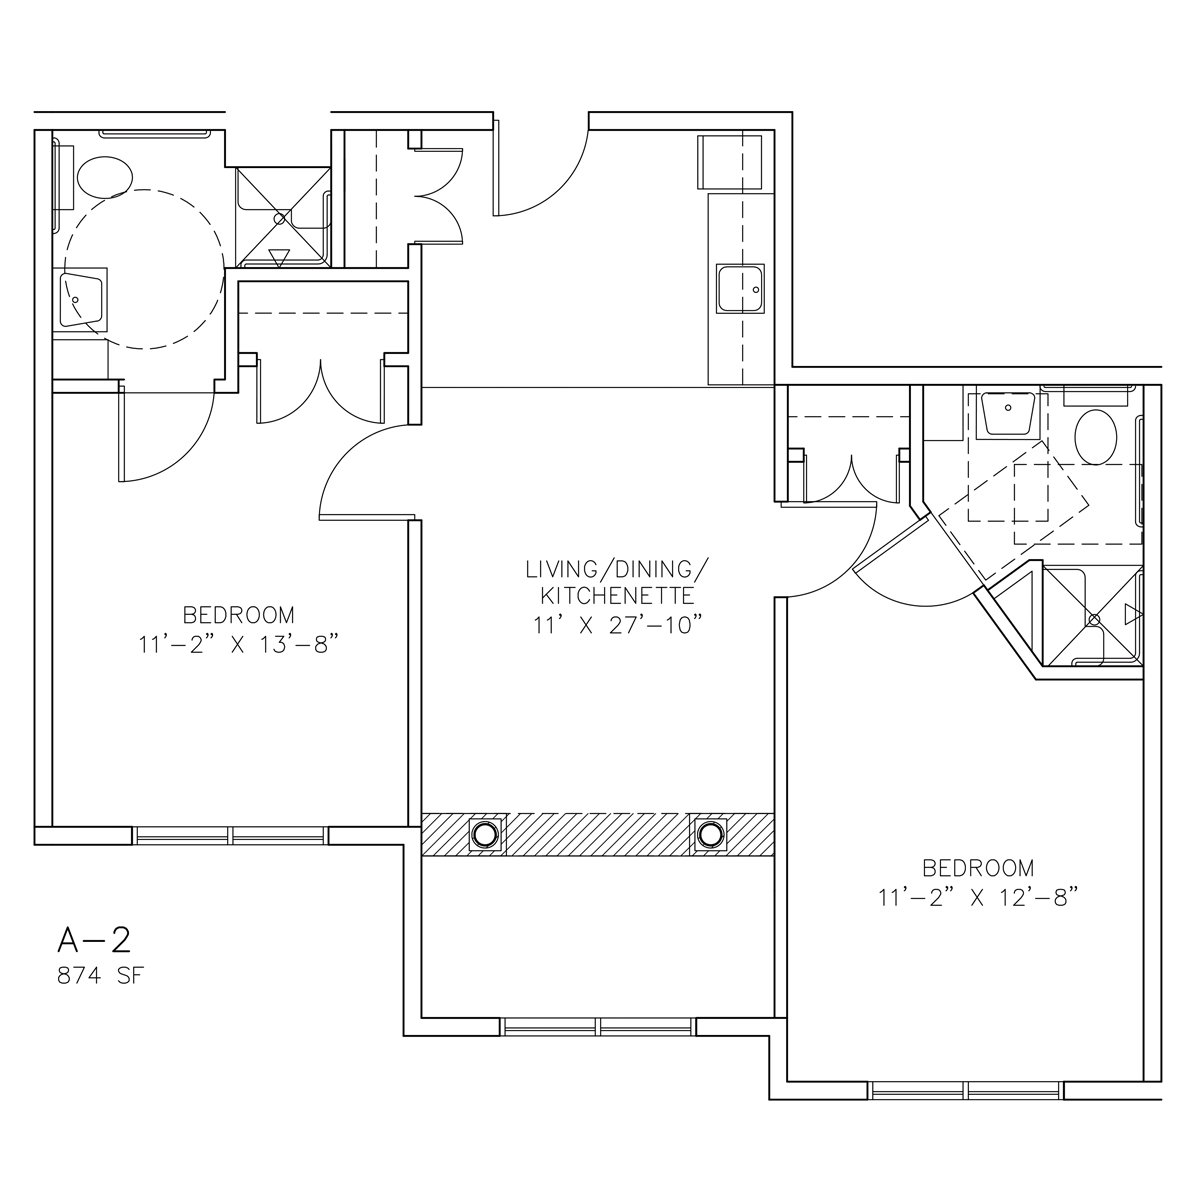 A-2 - Two Bedroom - 874 sf